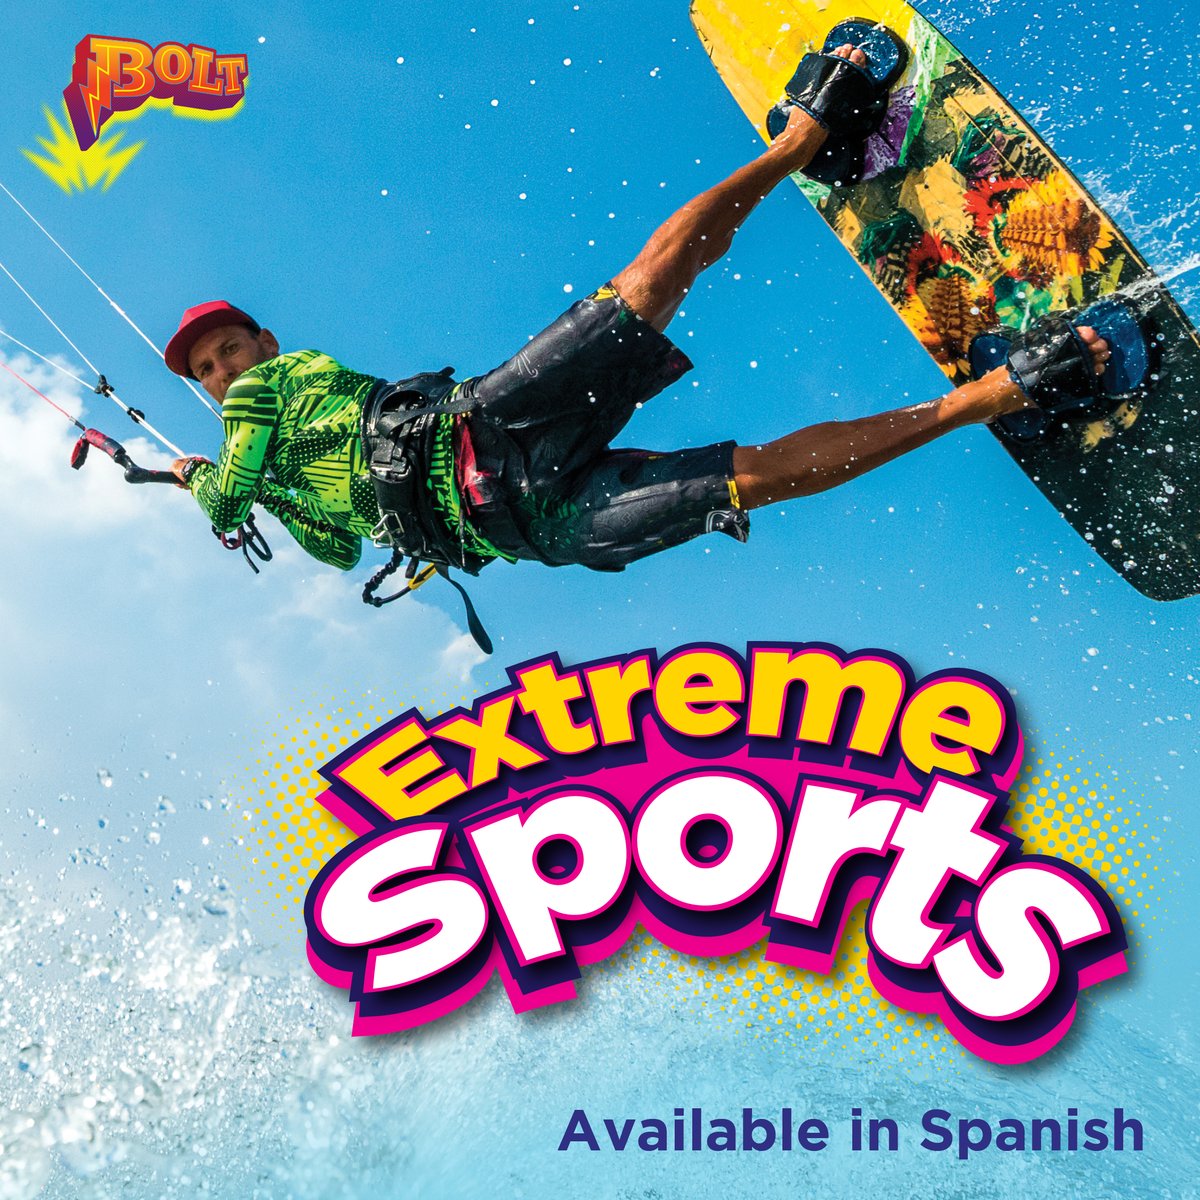 Learn about extreme sports in this new series from Bolt!

Extreme Sports
blackrabbitbooks.com/collections/ex…

#newbooks #extremesports #BlackRabbitBooks